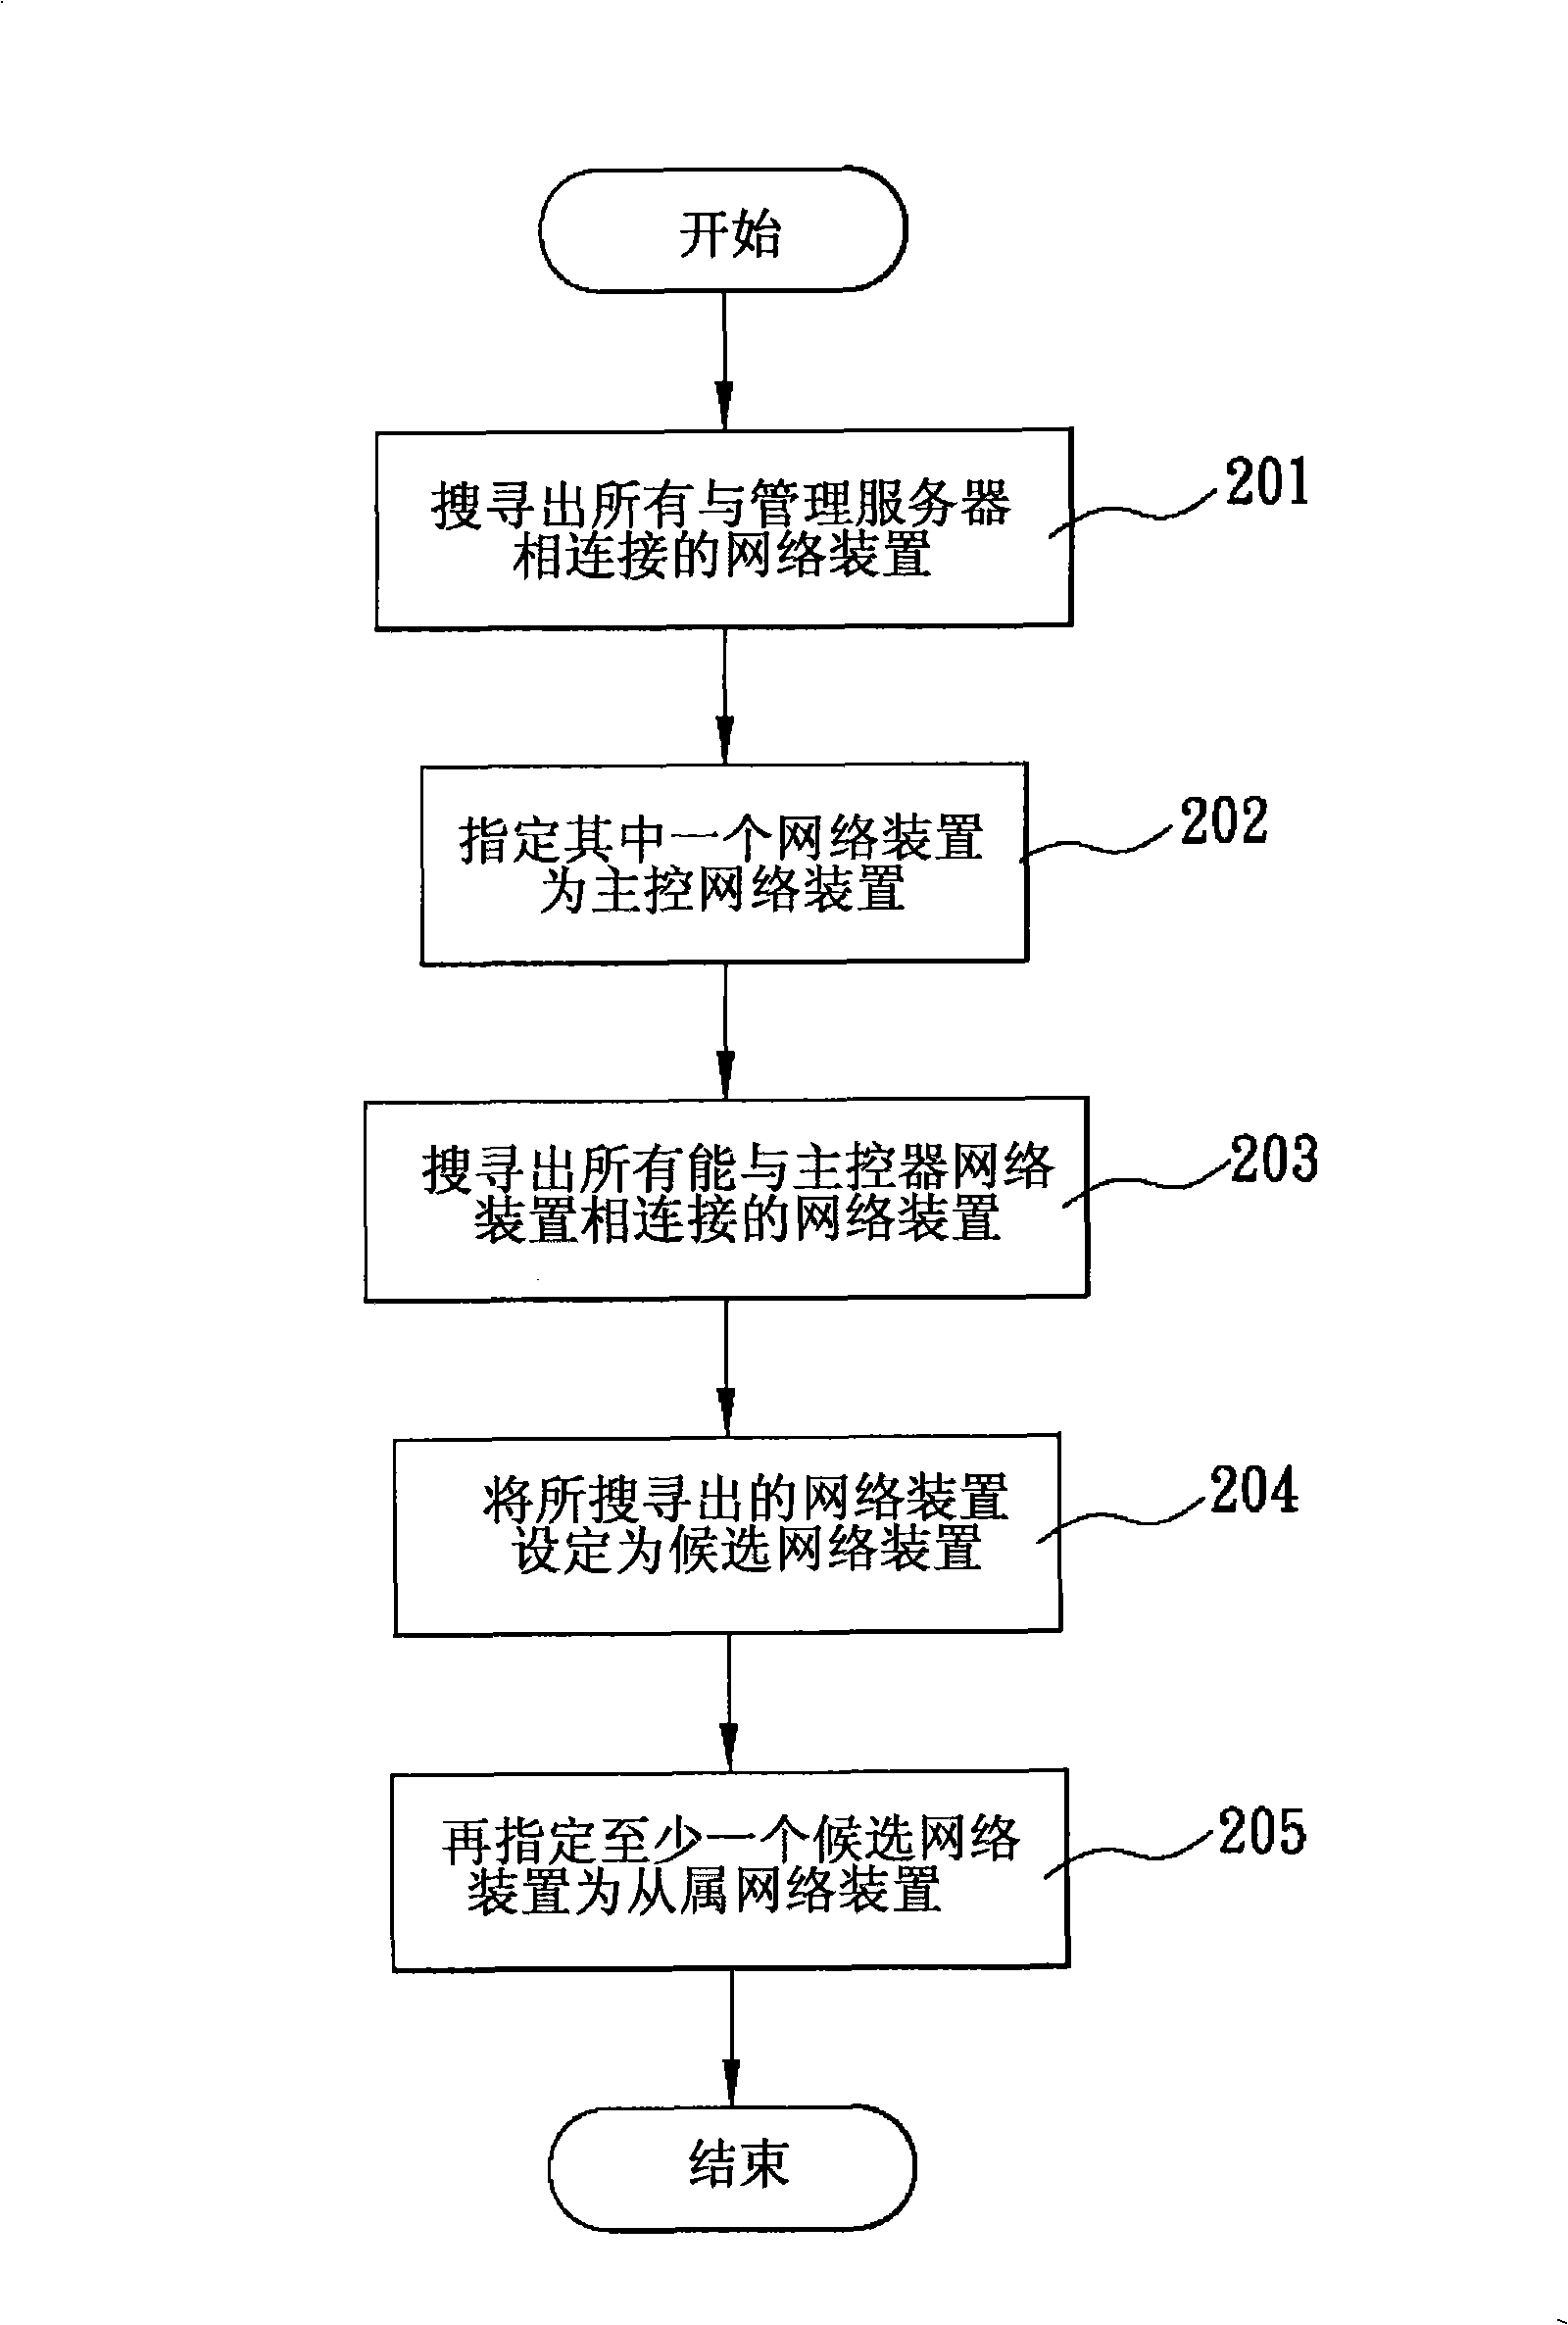 Method for managing and setting a plurality of network devices